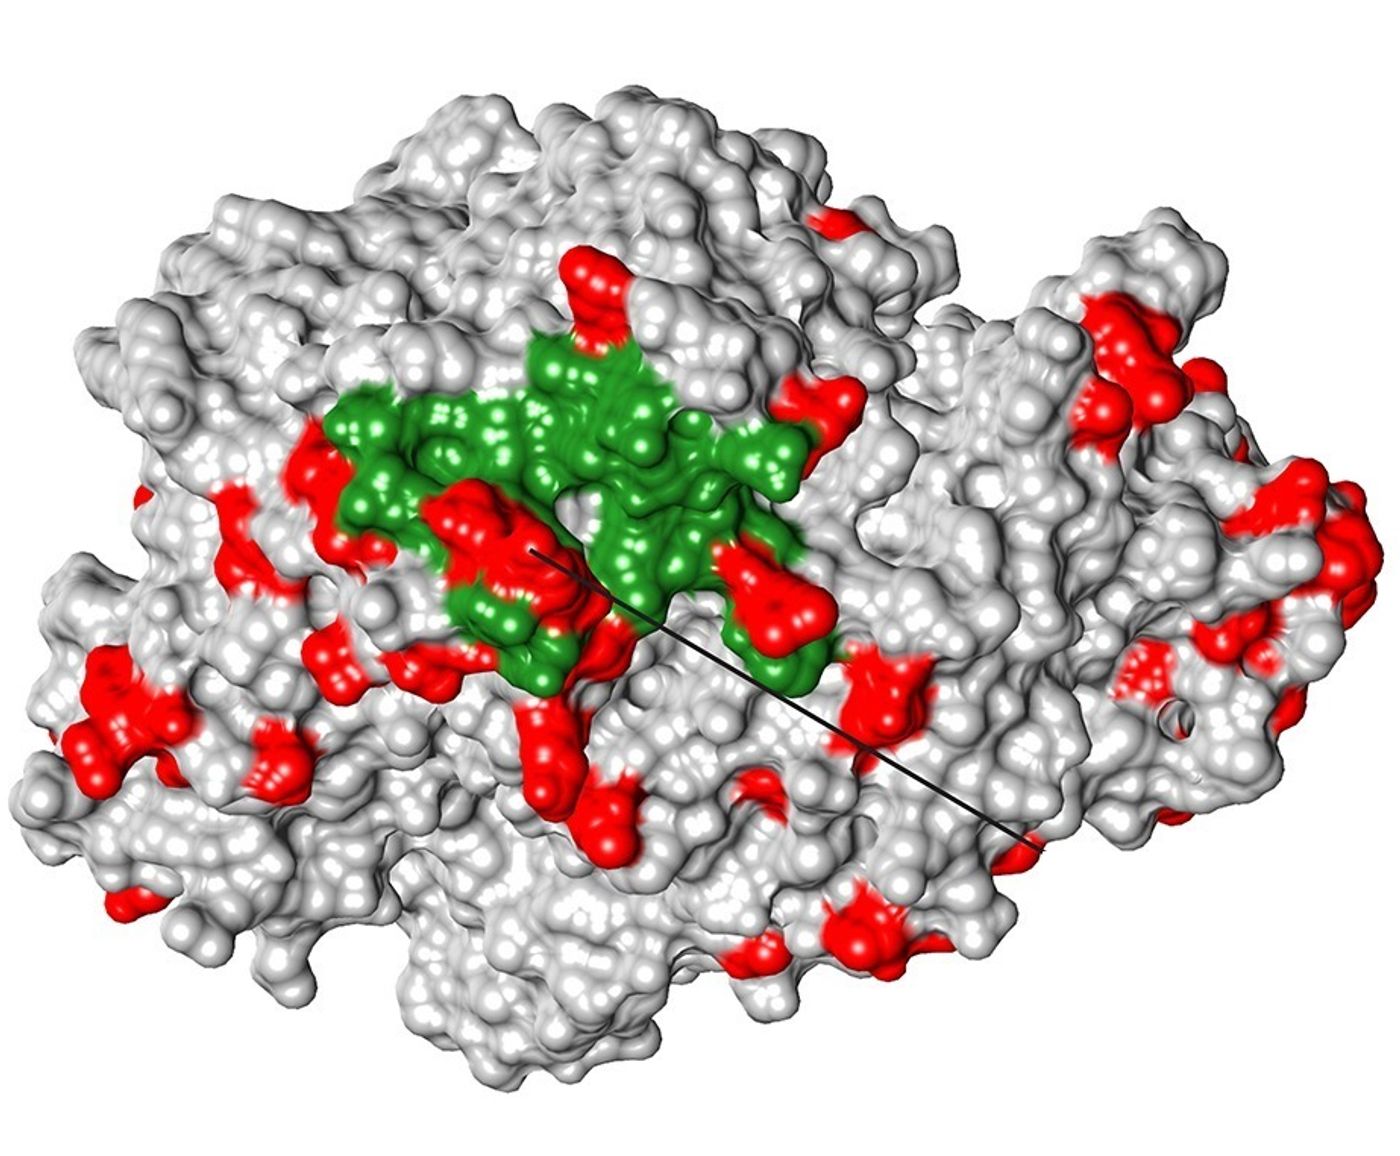 Aminopeptidase N is a protein that acts as a receptor for coronaviruses, the family of viruses behind recent epidemics of SARS and MERS, among others. / Credit: Image Courtesy of David Enard